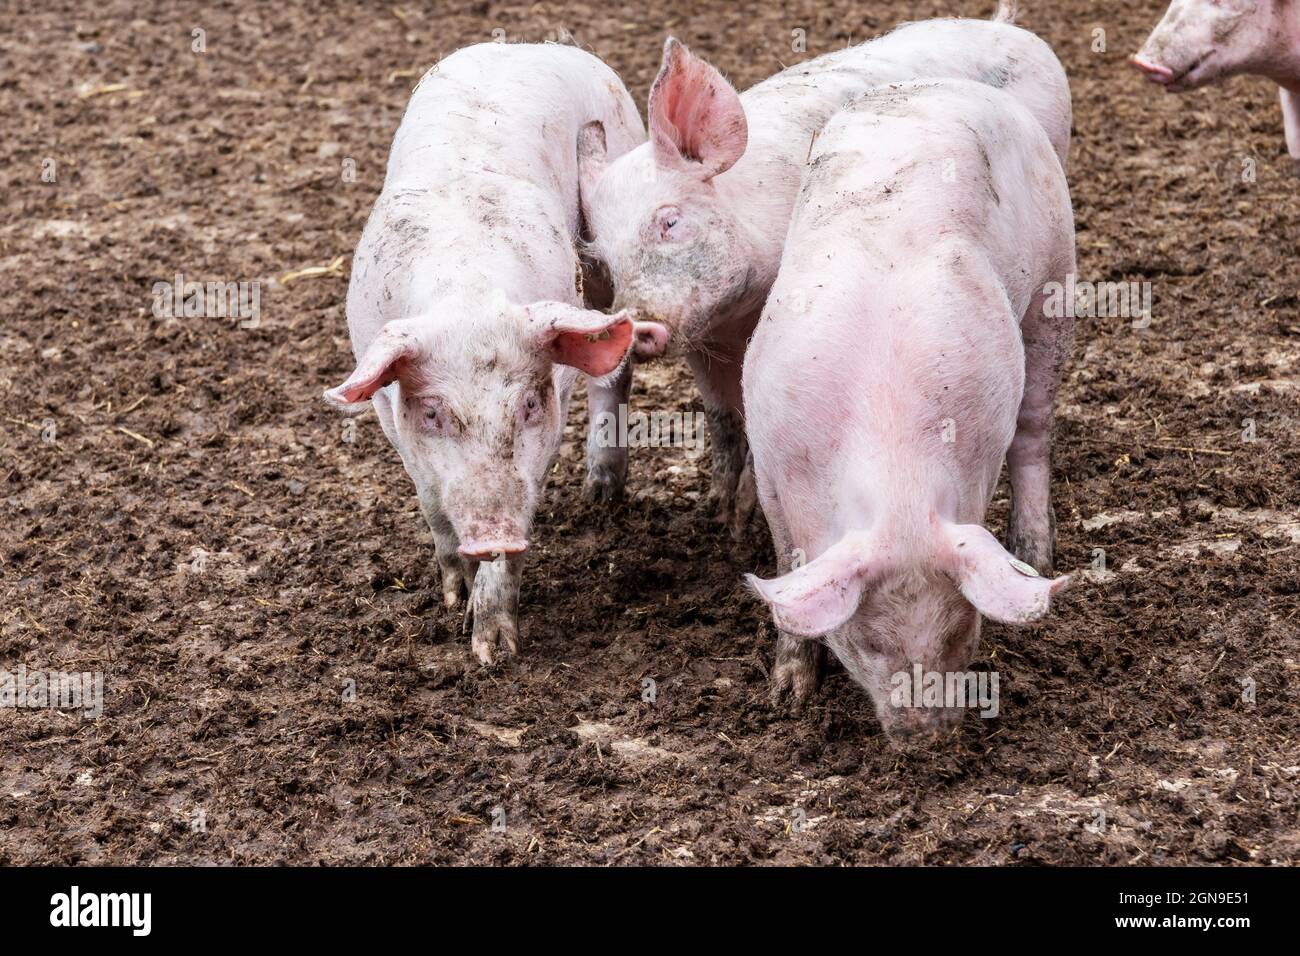 Three young pigs in the outdoor enclosure Stock Photo